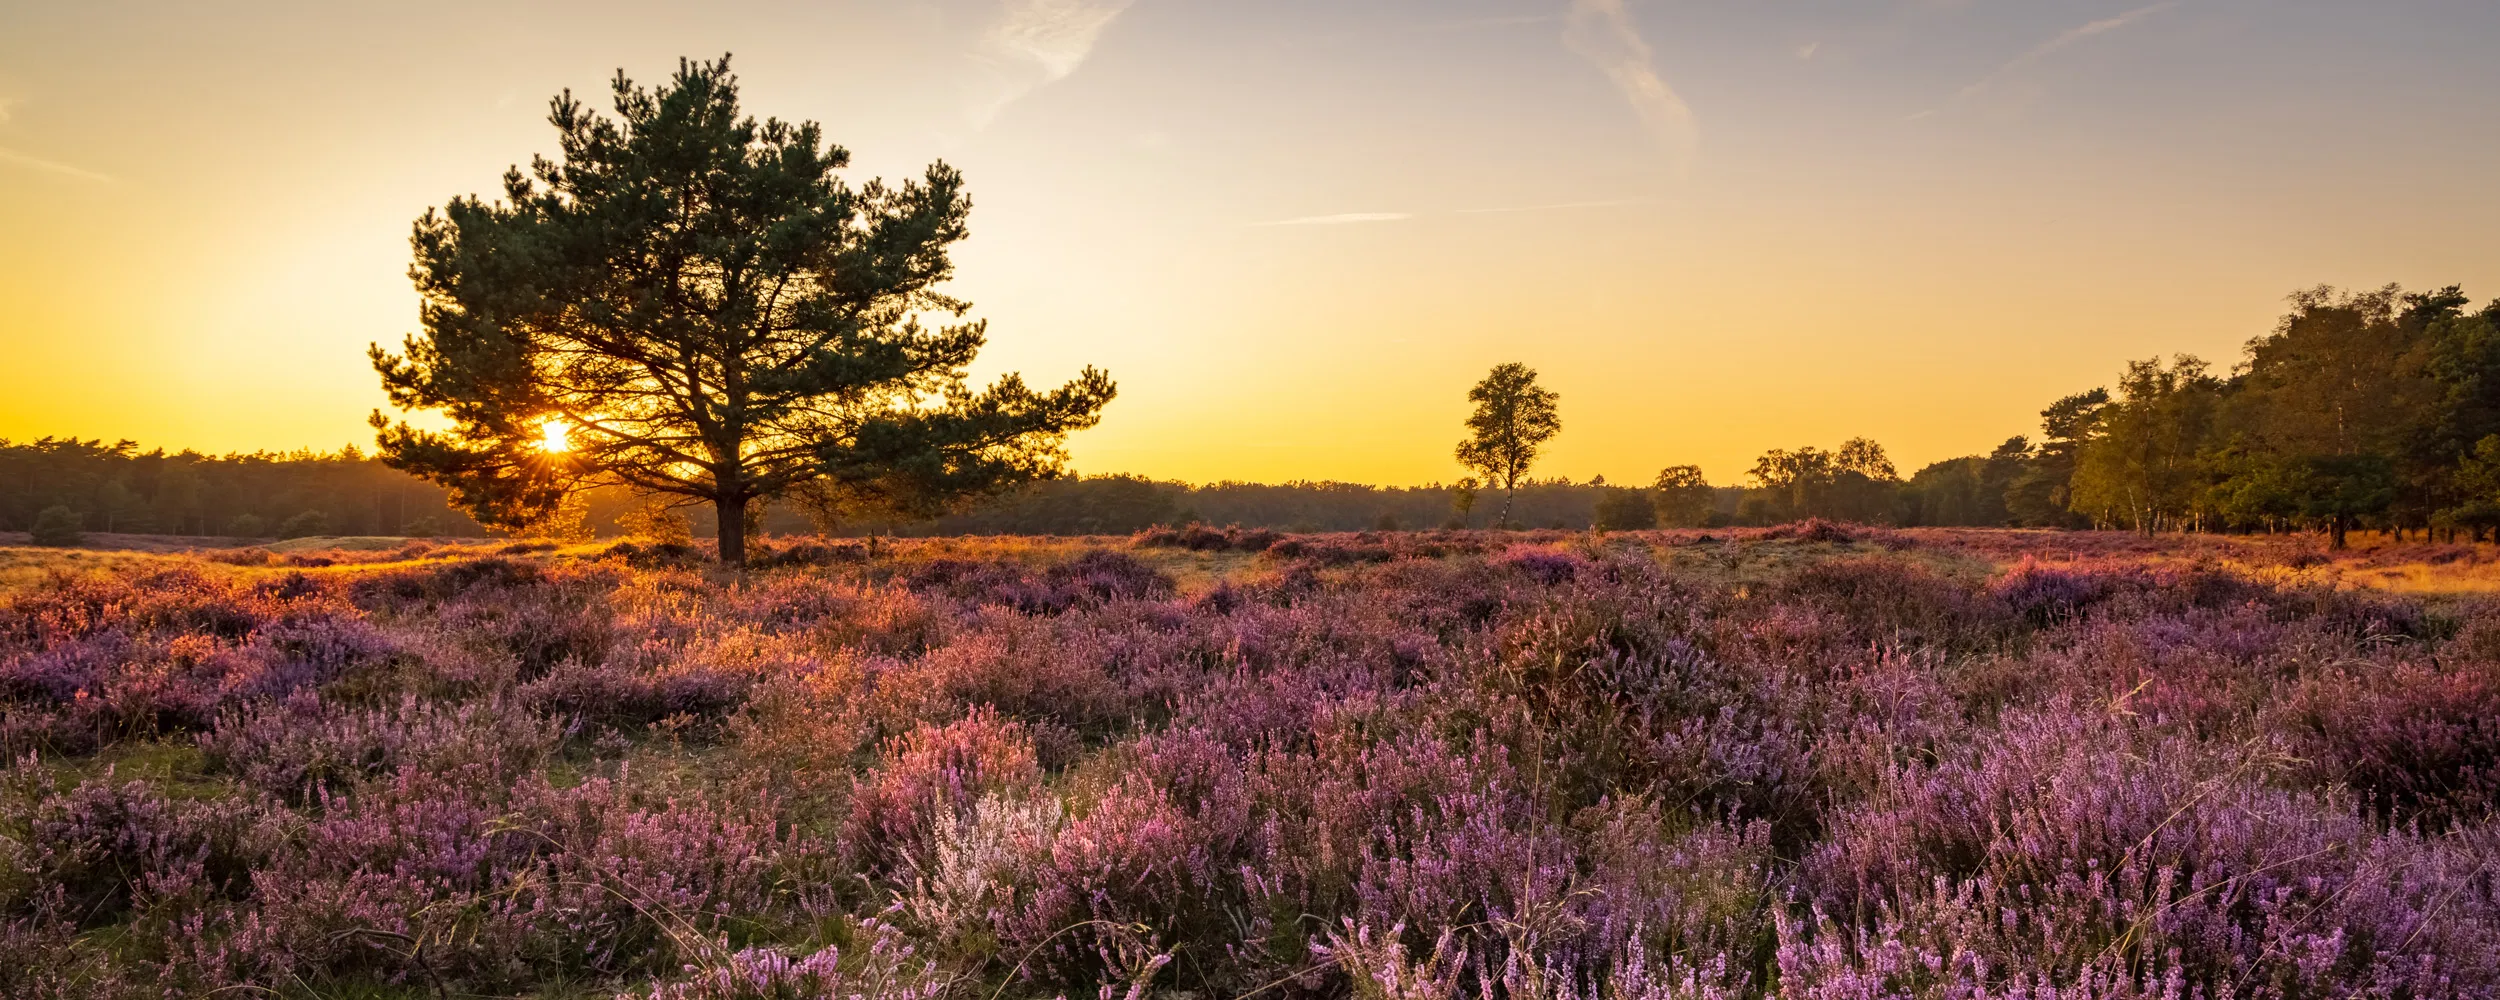 The sun rising behind a large tree, sitting in a flat landscape of purple heather